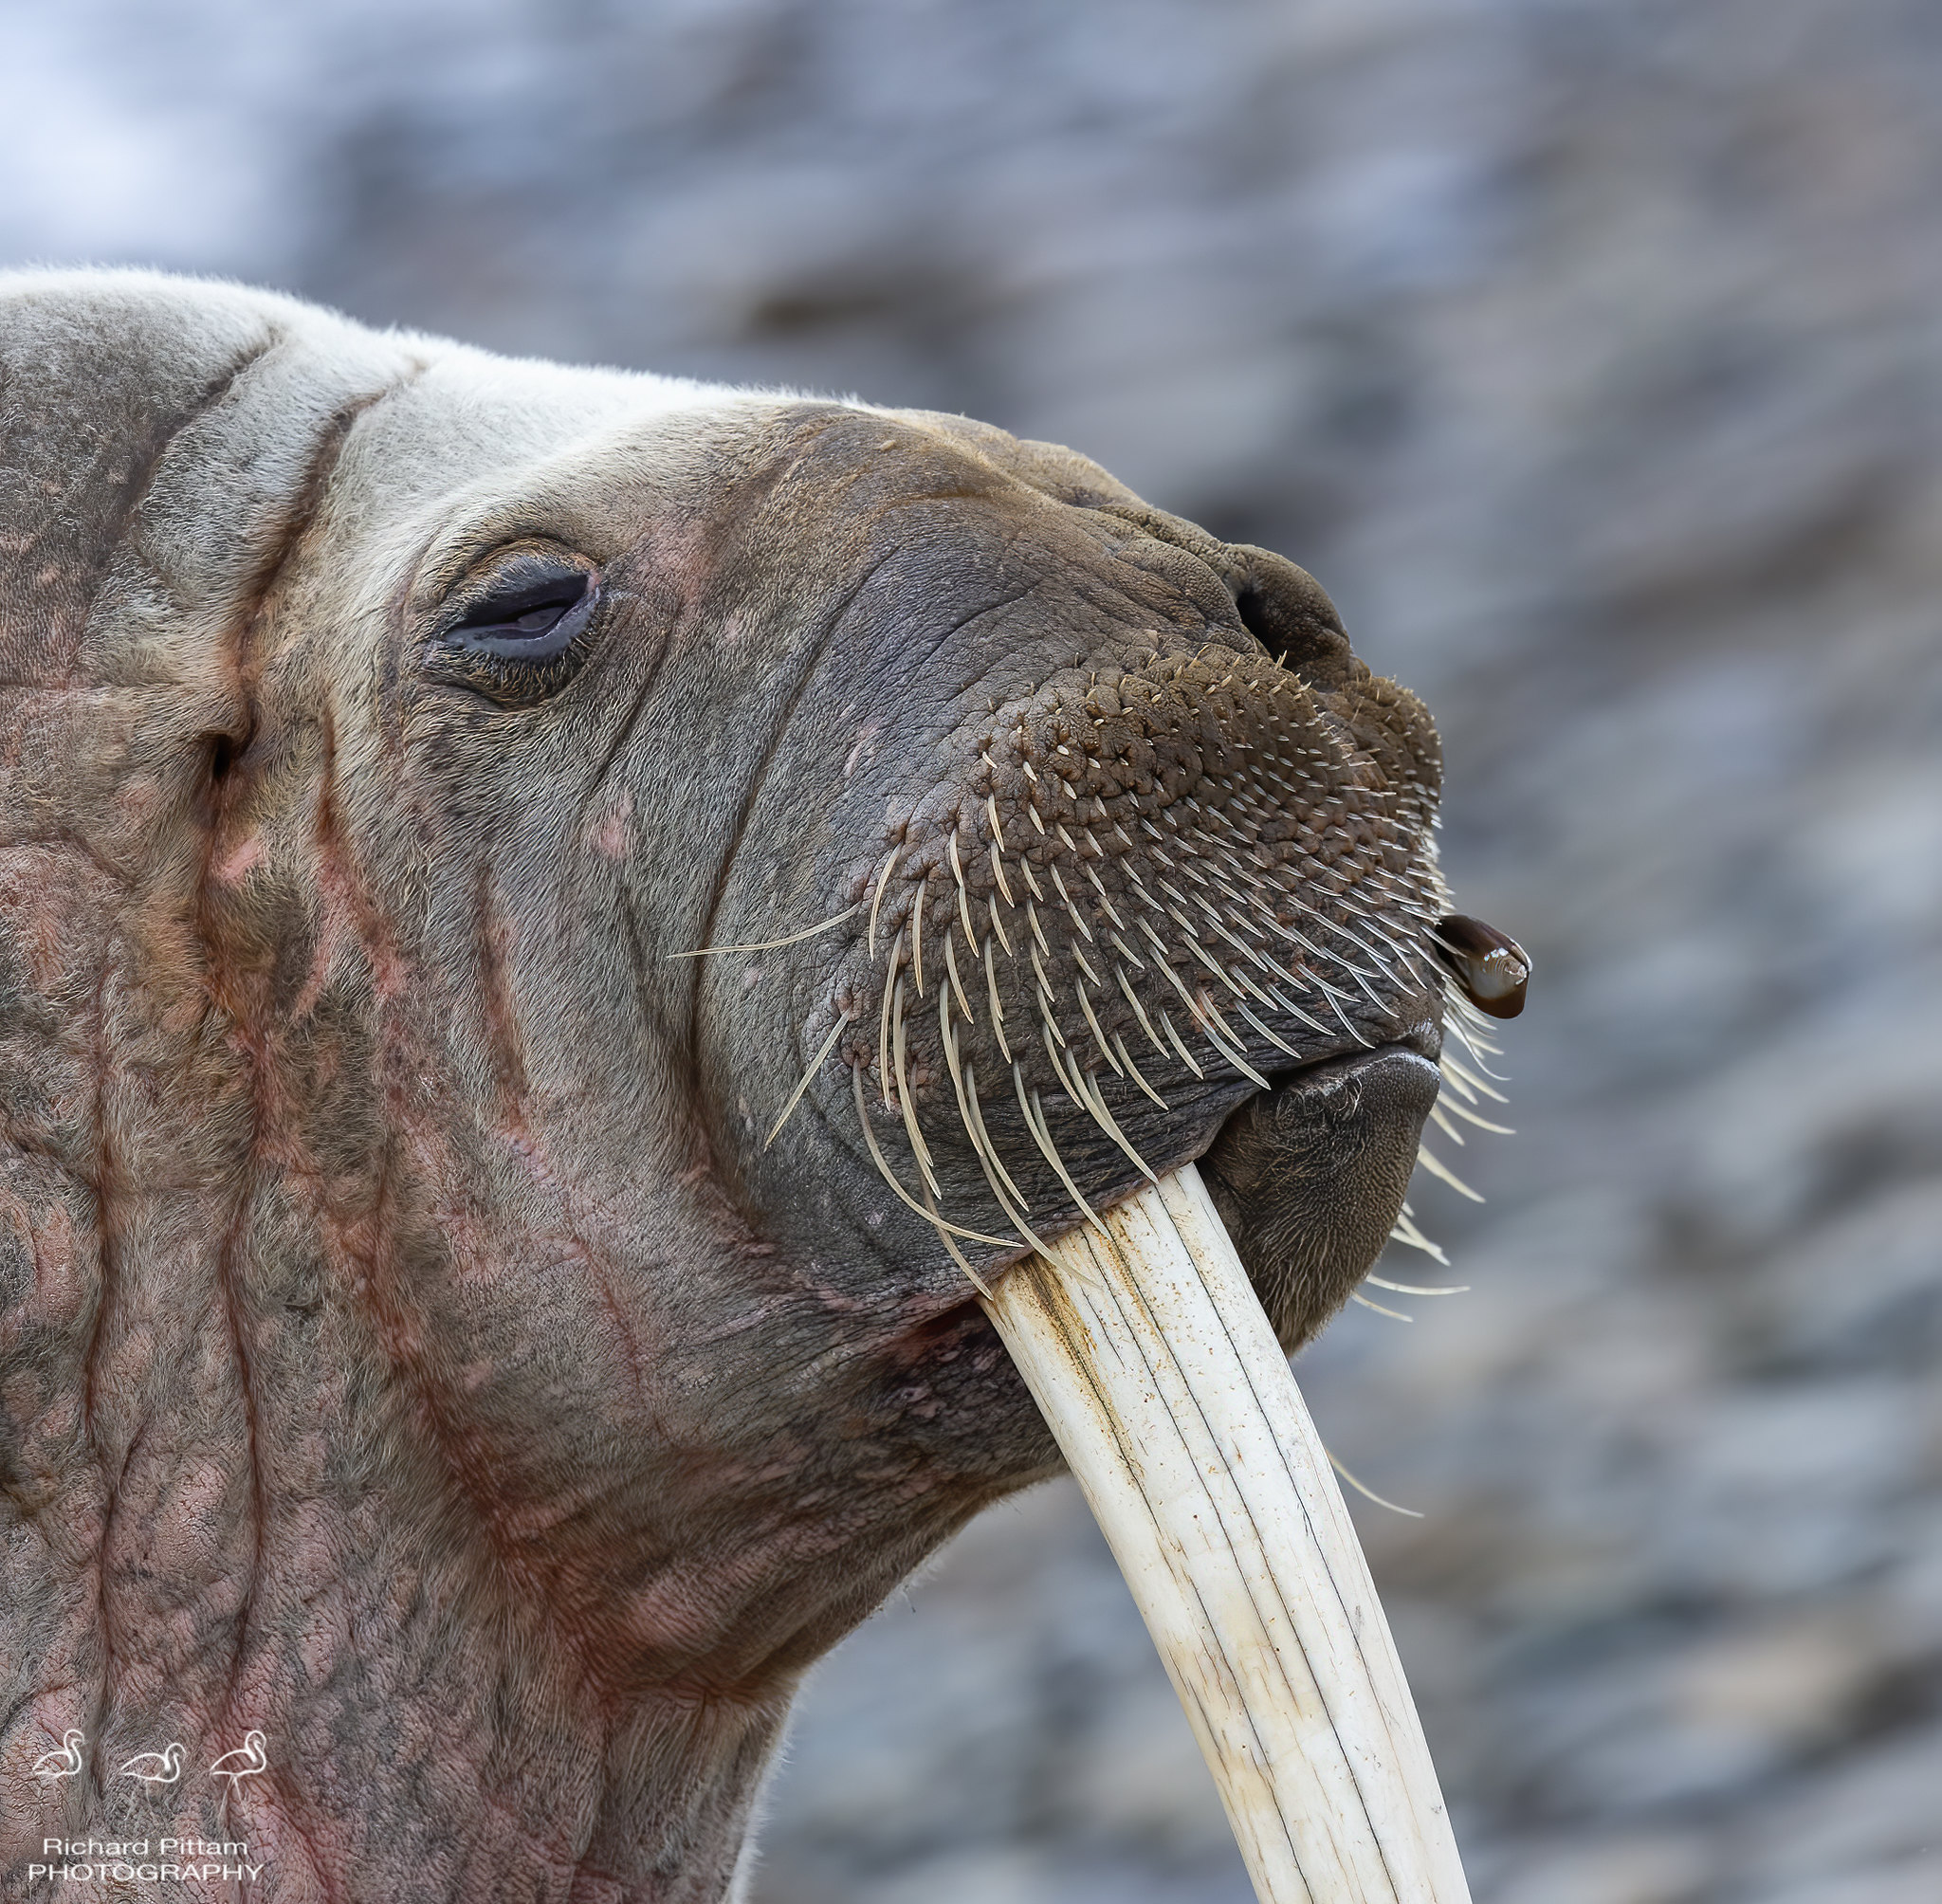 Re-processed images - Wally 'one tusk' Walrus